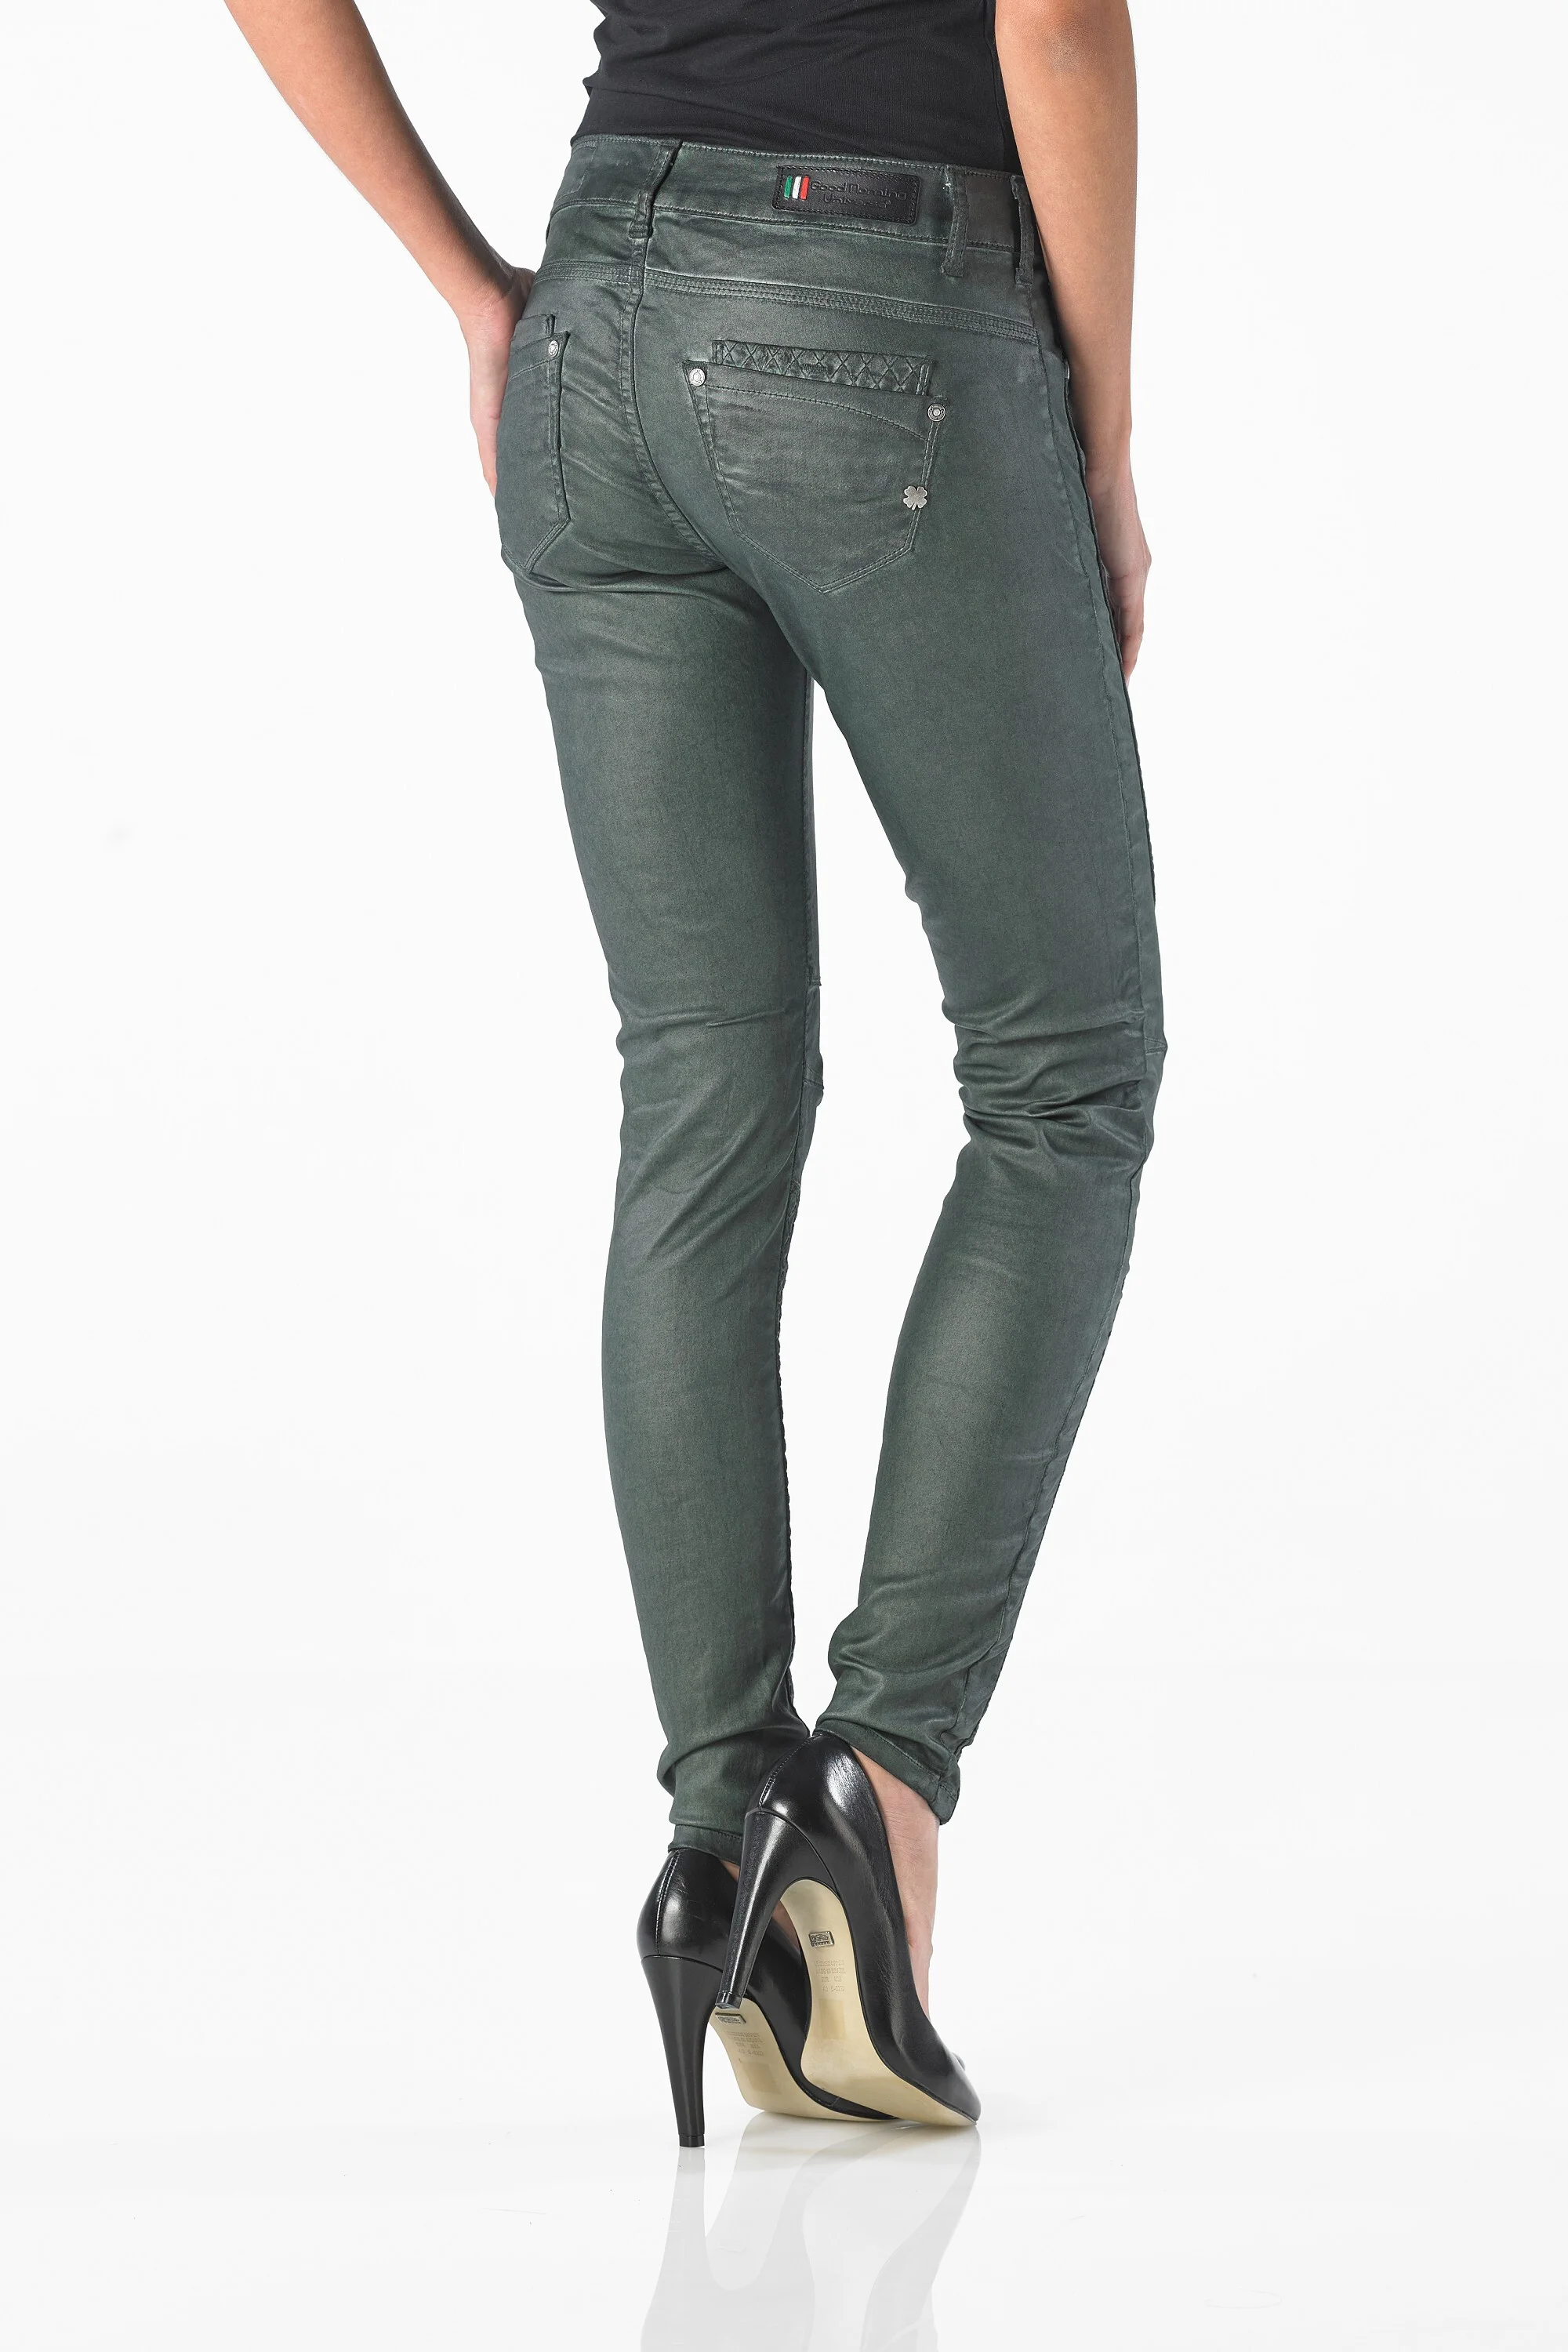 Tori - Superslim (Coated Oil Dyed Olive)